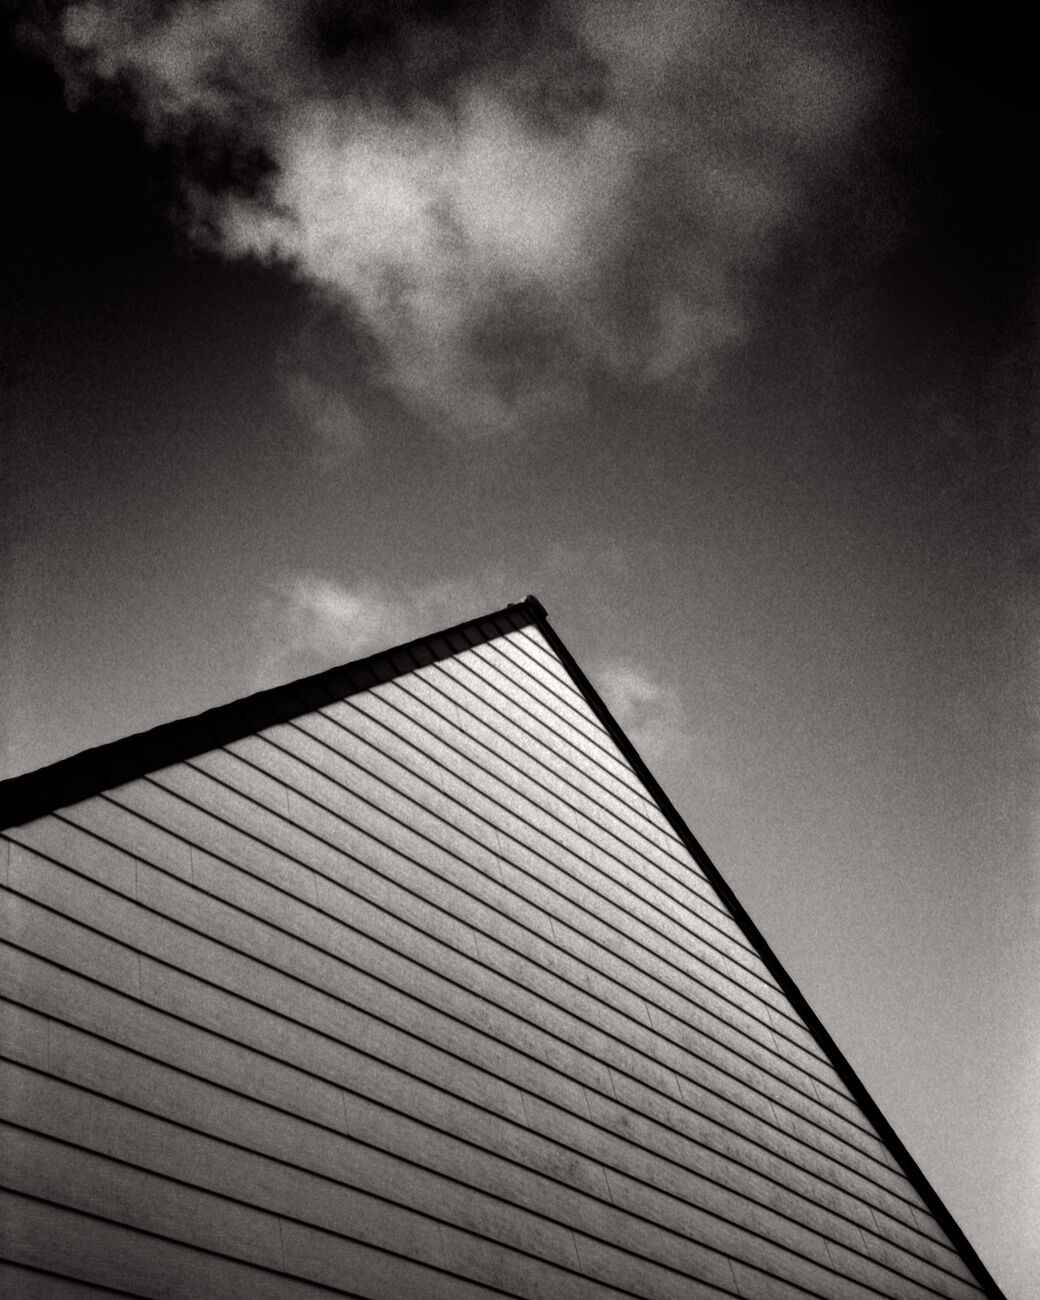 Photograph print 22 x 27.6 in, Roof. Ref-11620-16 - Denis Olivier Art Photography